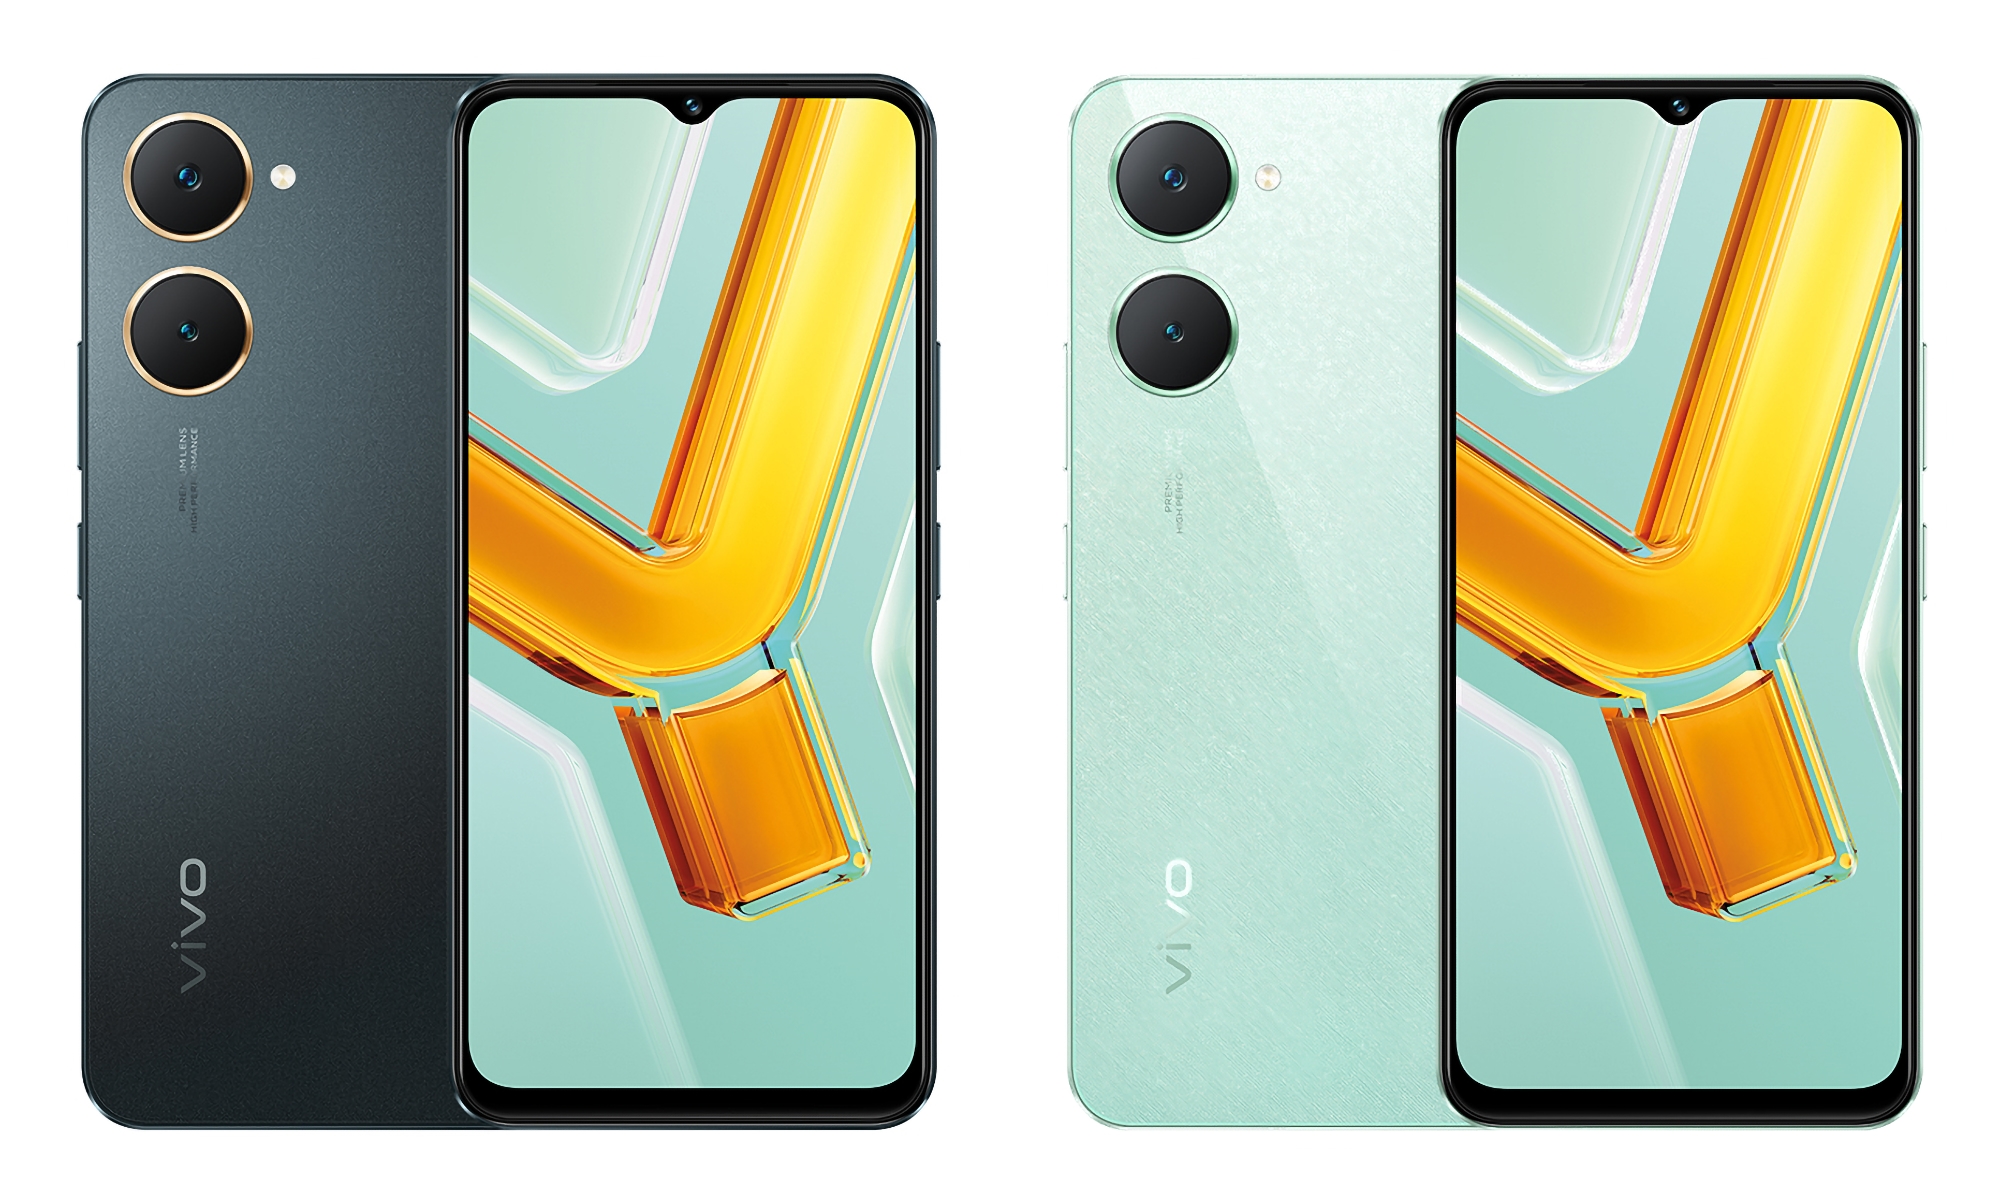 Here's what the vivo Y03 will look like: the company's new budget smartphone with a 90Hz LCD screen and a MediaTek Helio G85 chip